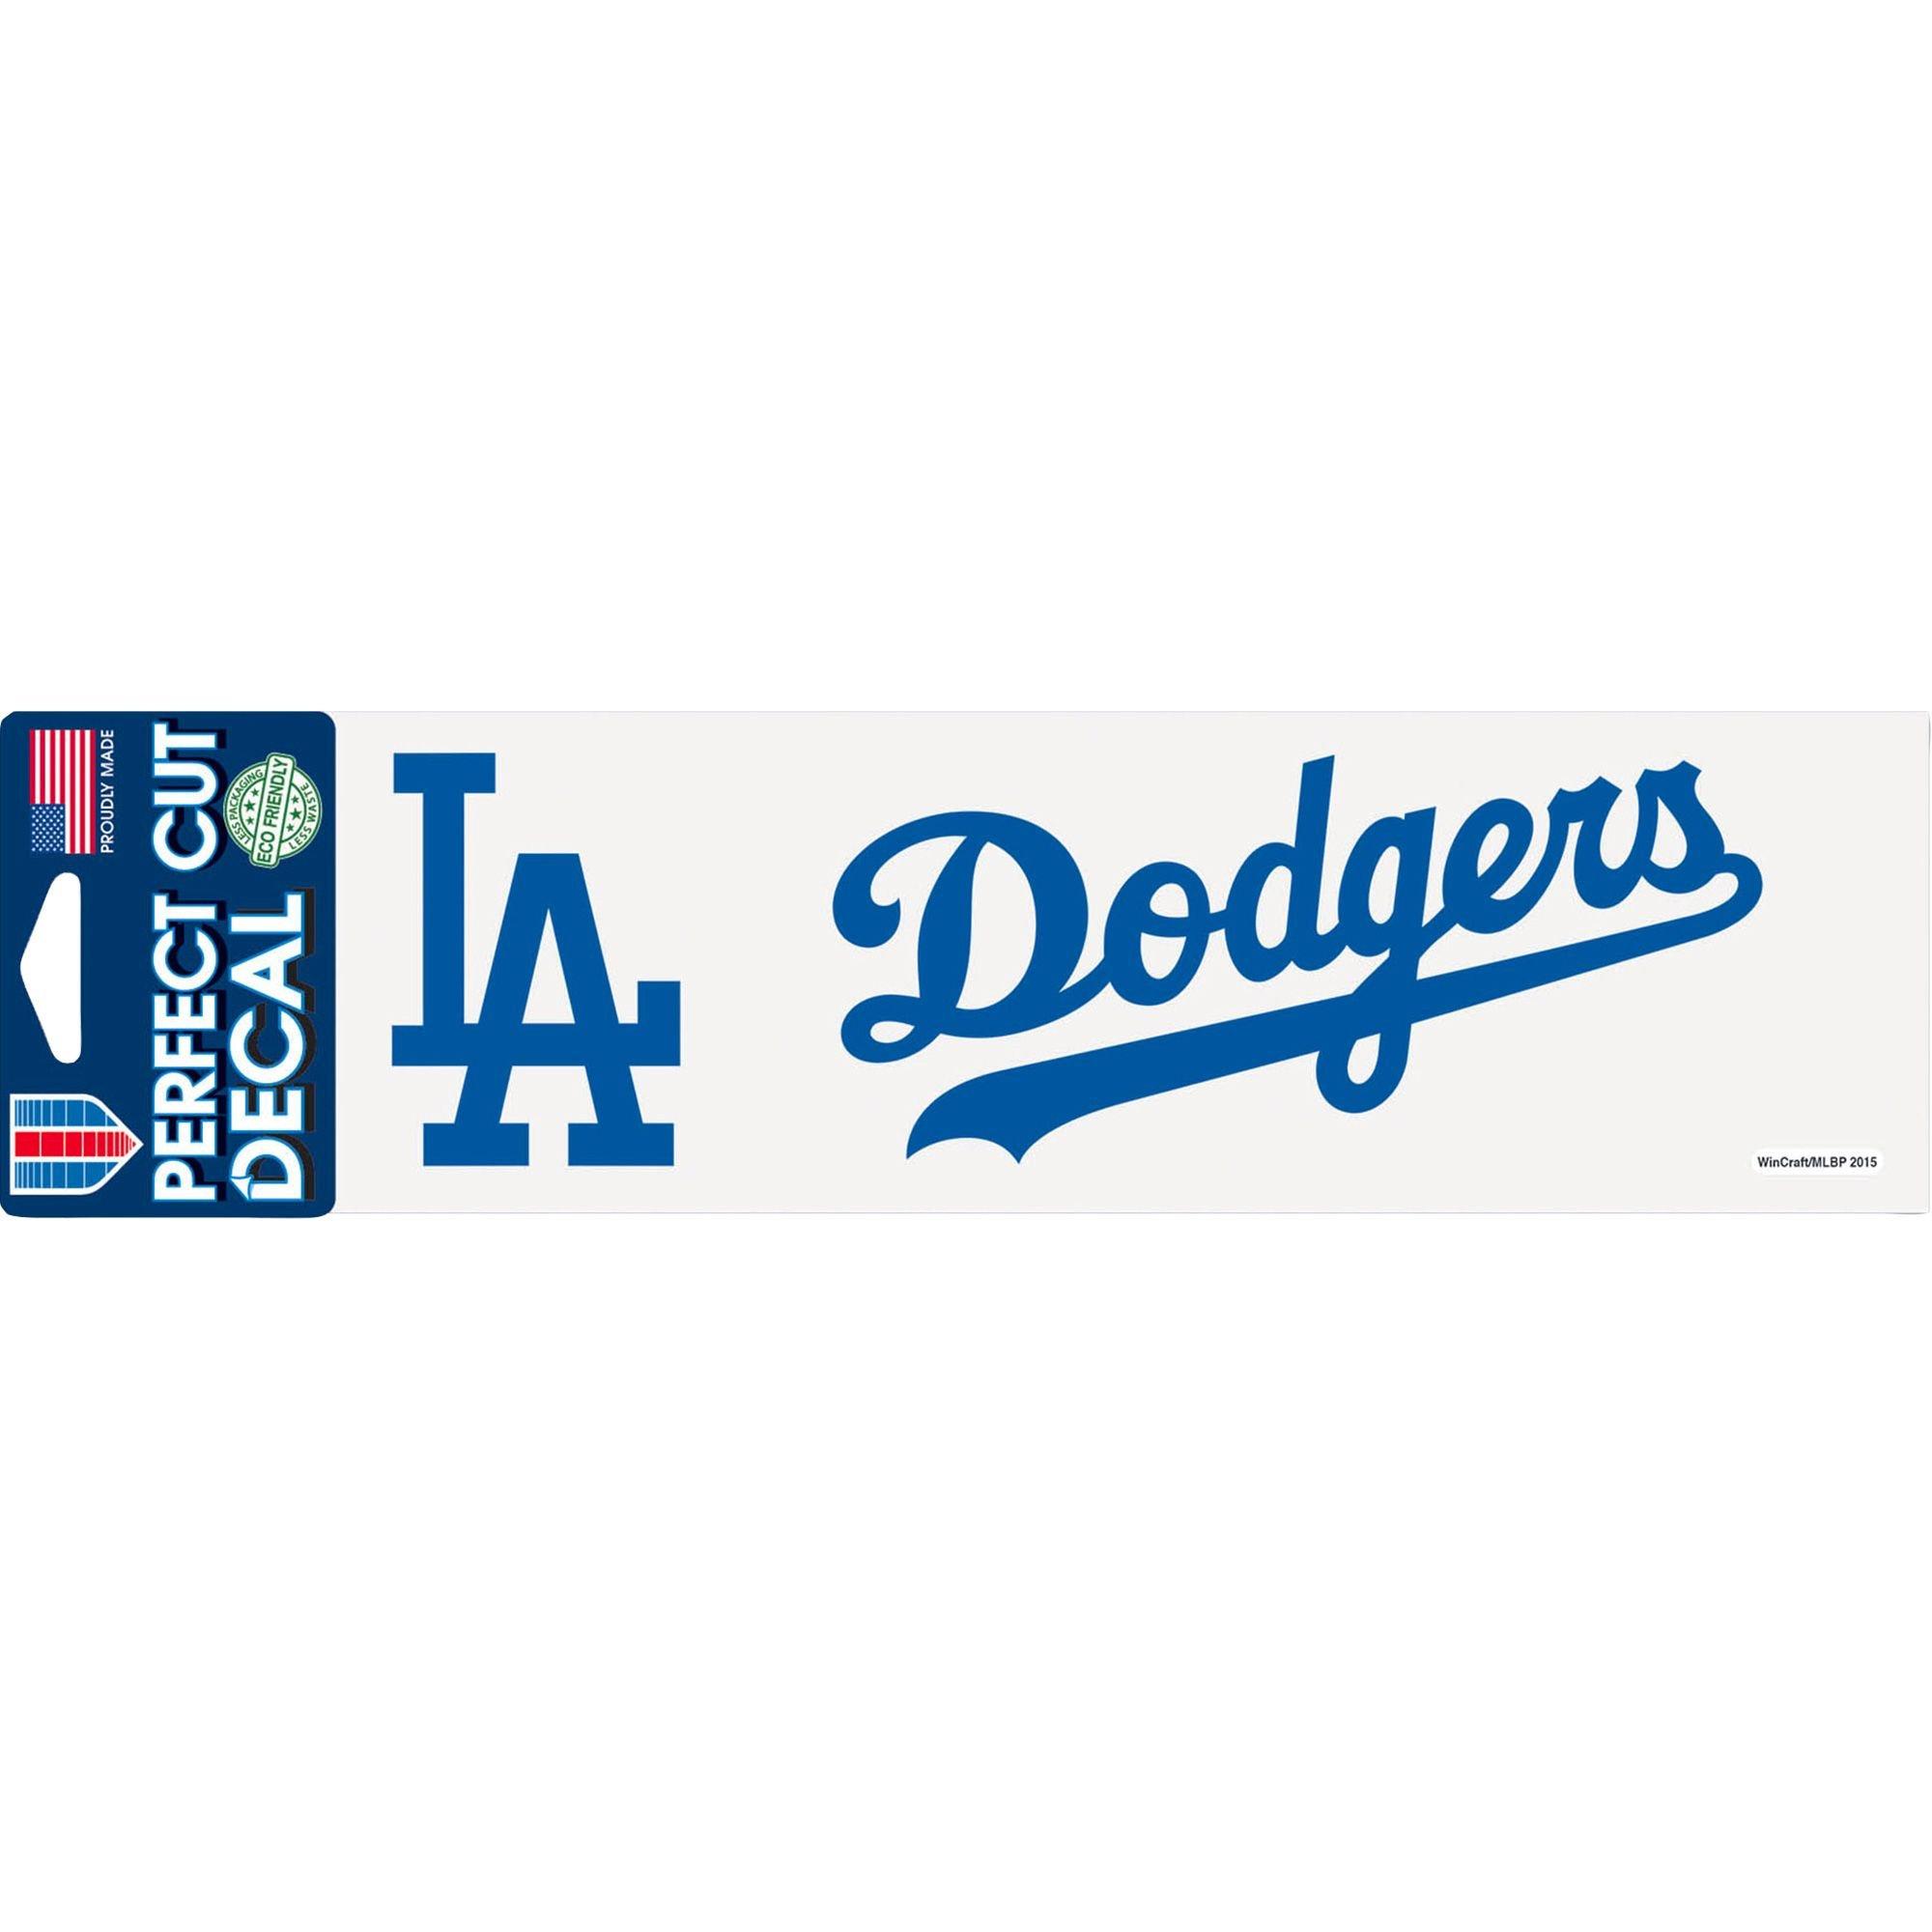 Los Angeles Dodgers on X: Clear your schedule and join us for a